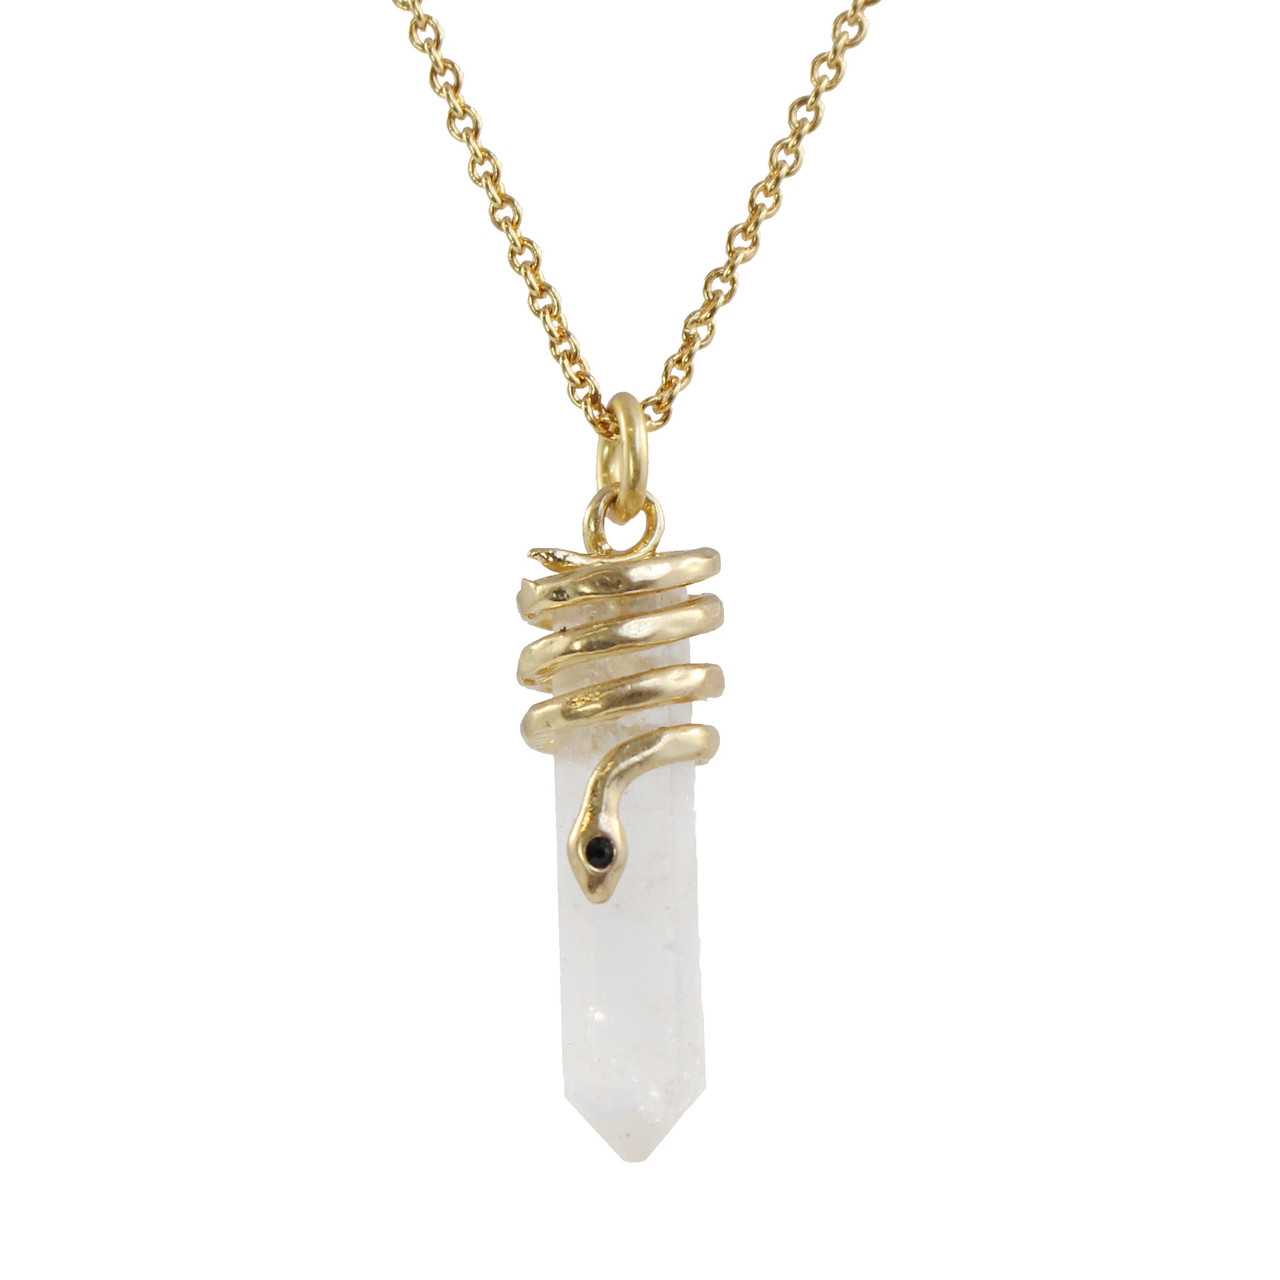 Healing stone and snake necklace Genuine Quartz Crystal and Snake Charm Necklace